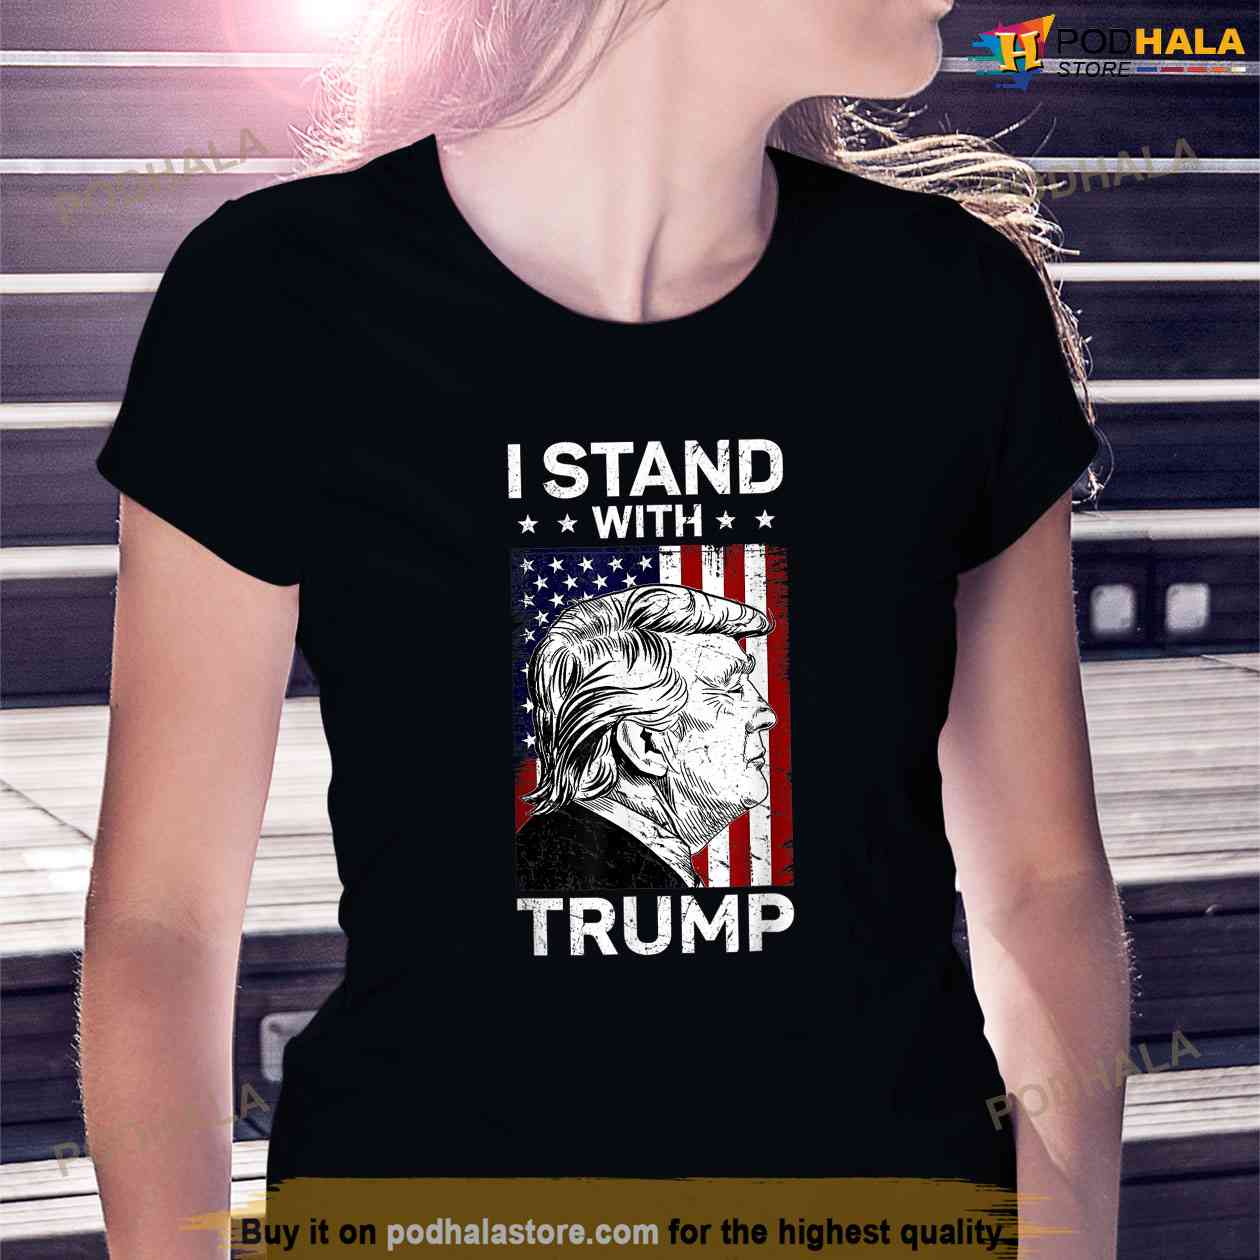 I With Trump T-Shirt, Free Trump Shirt - Bring Your Ideas, Thoughts And Imaginations Into Today